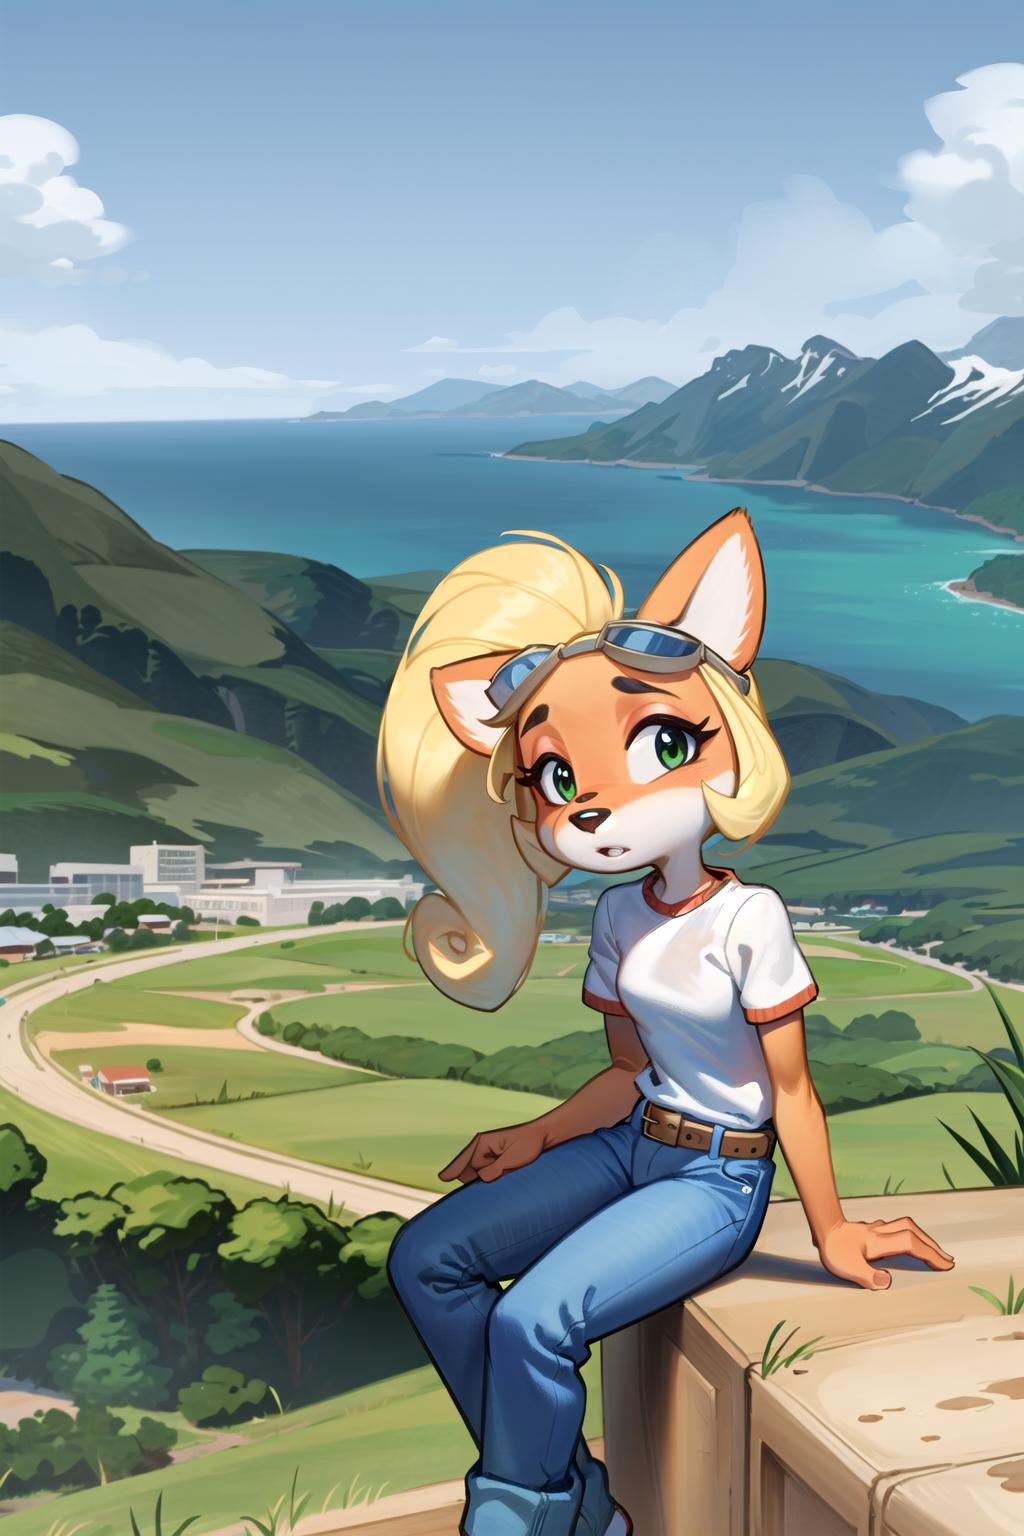 Coco Bandicoot LoRA image by Puffin